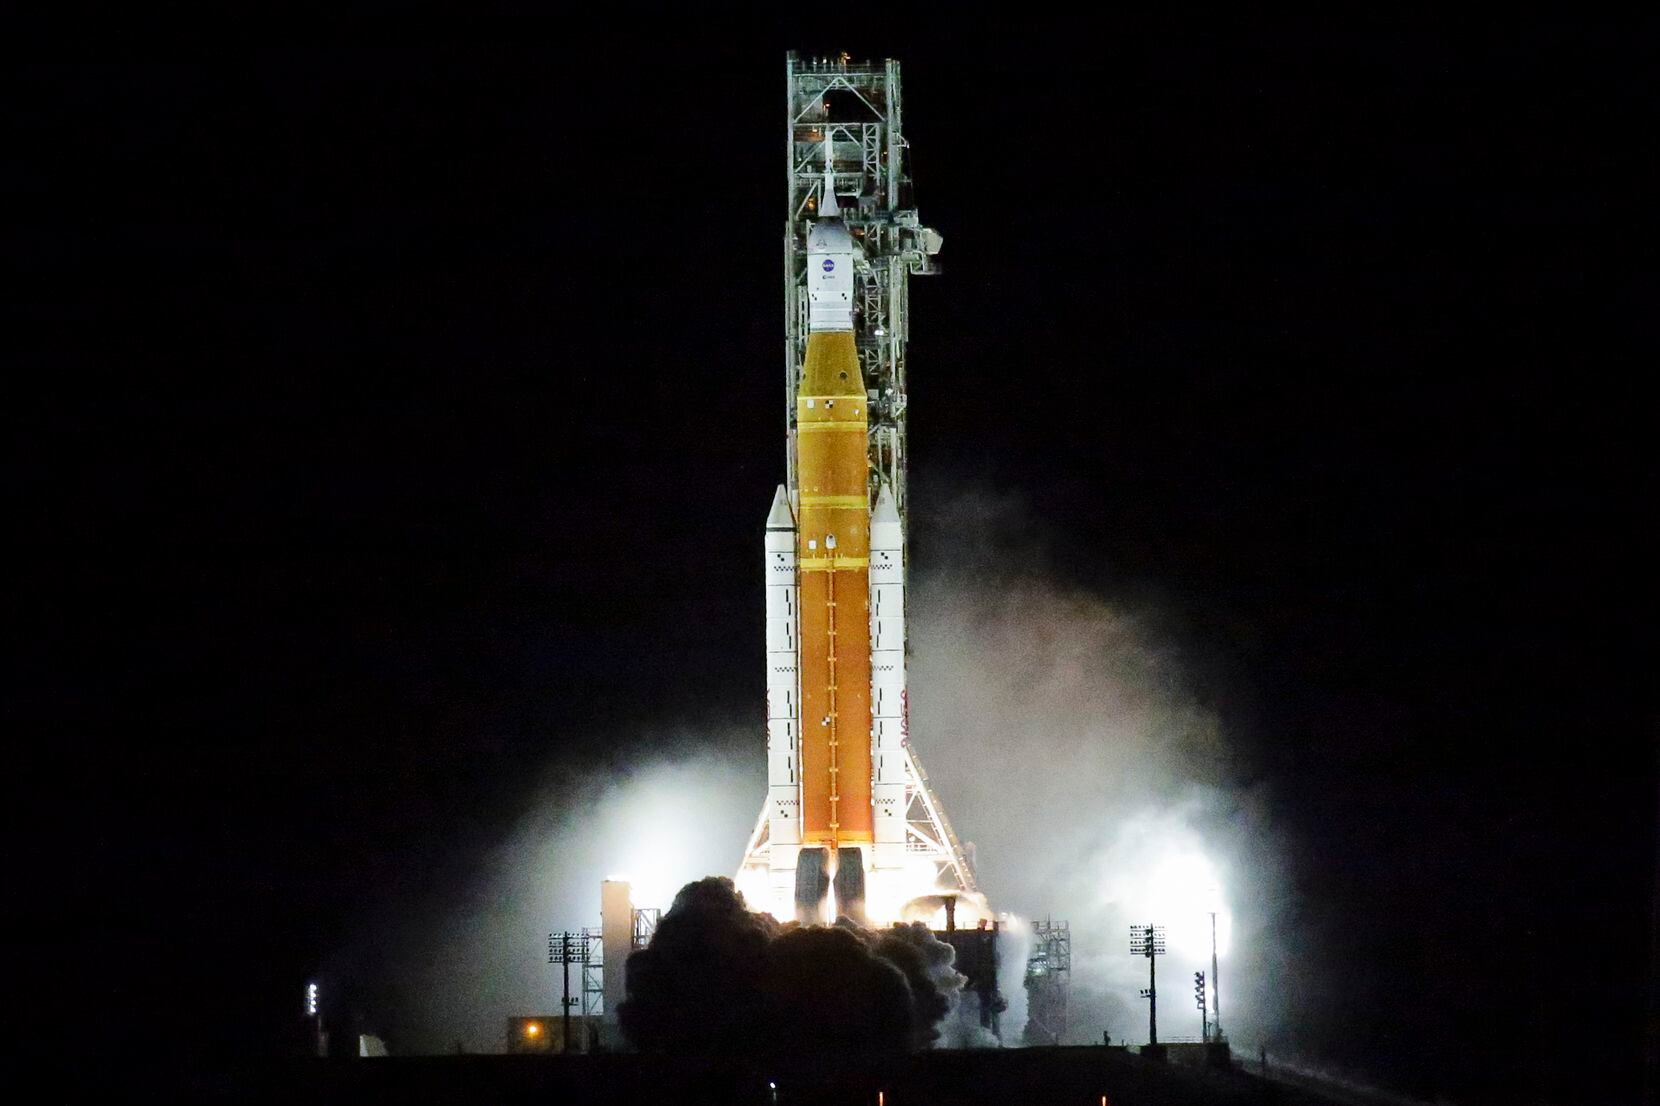 NASA's new moon rocket lifts off from Launch Pad 39B at the Kennedy Space Center in Cape...